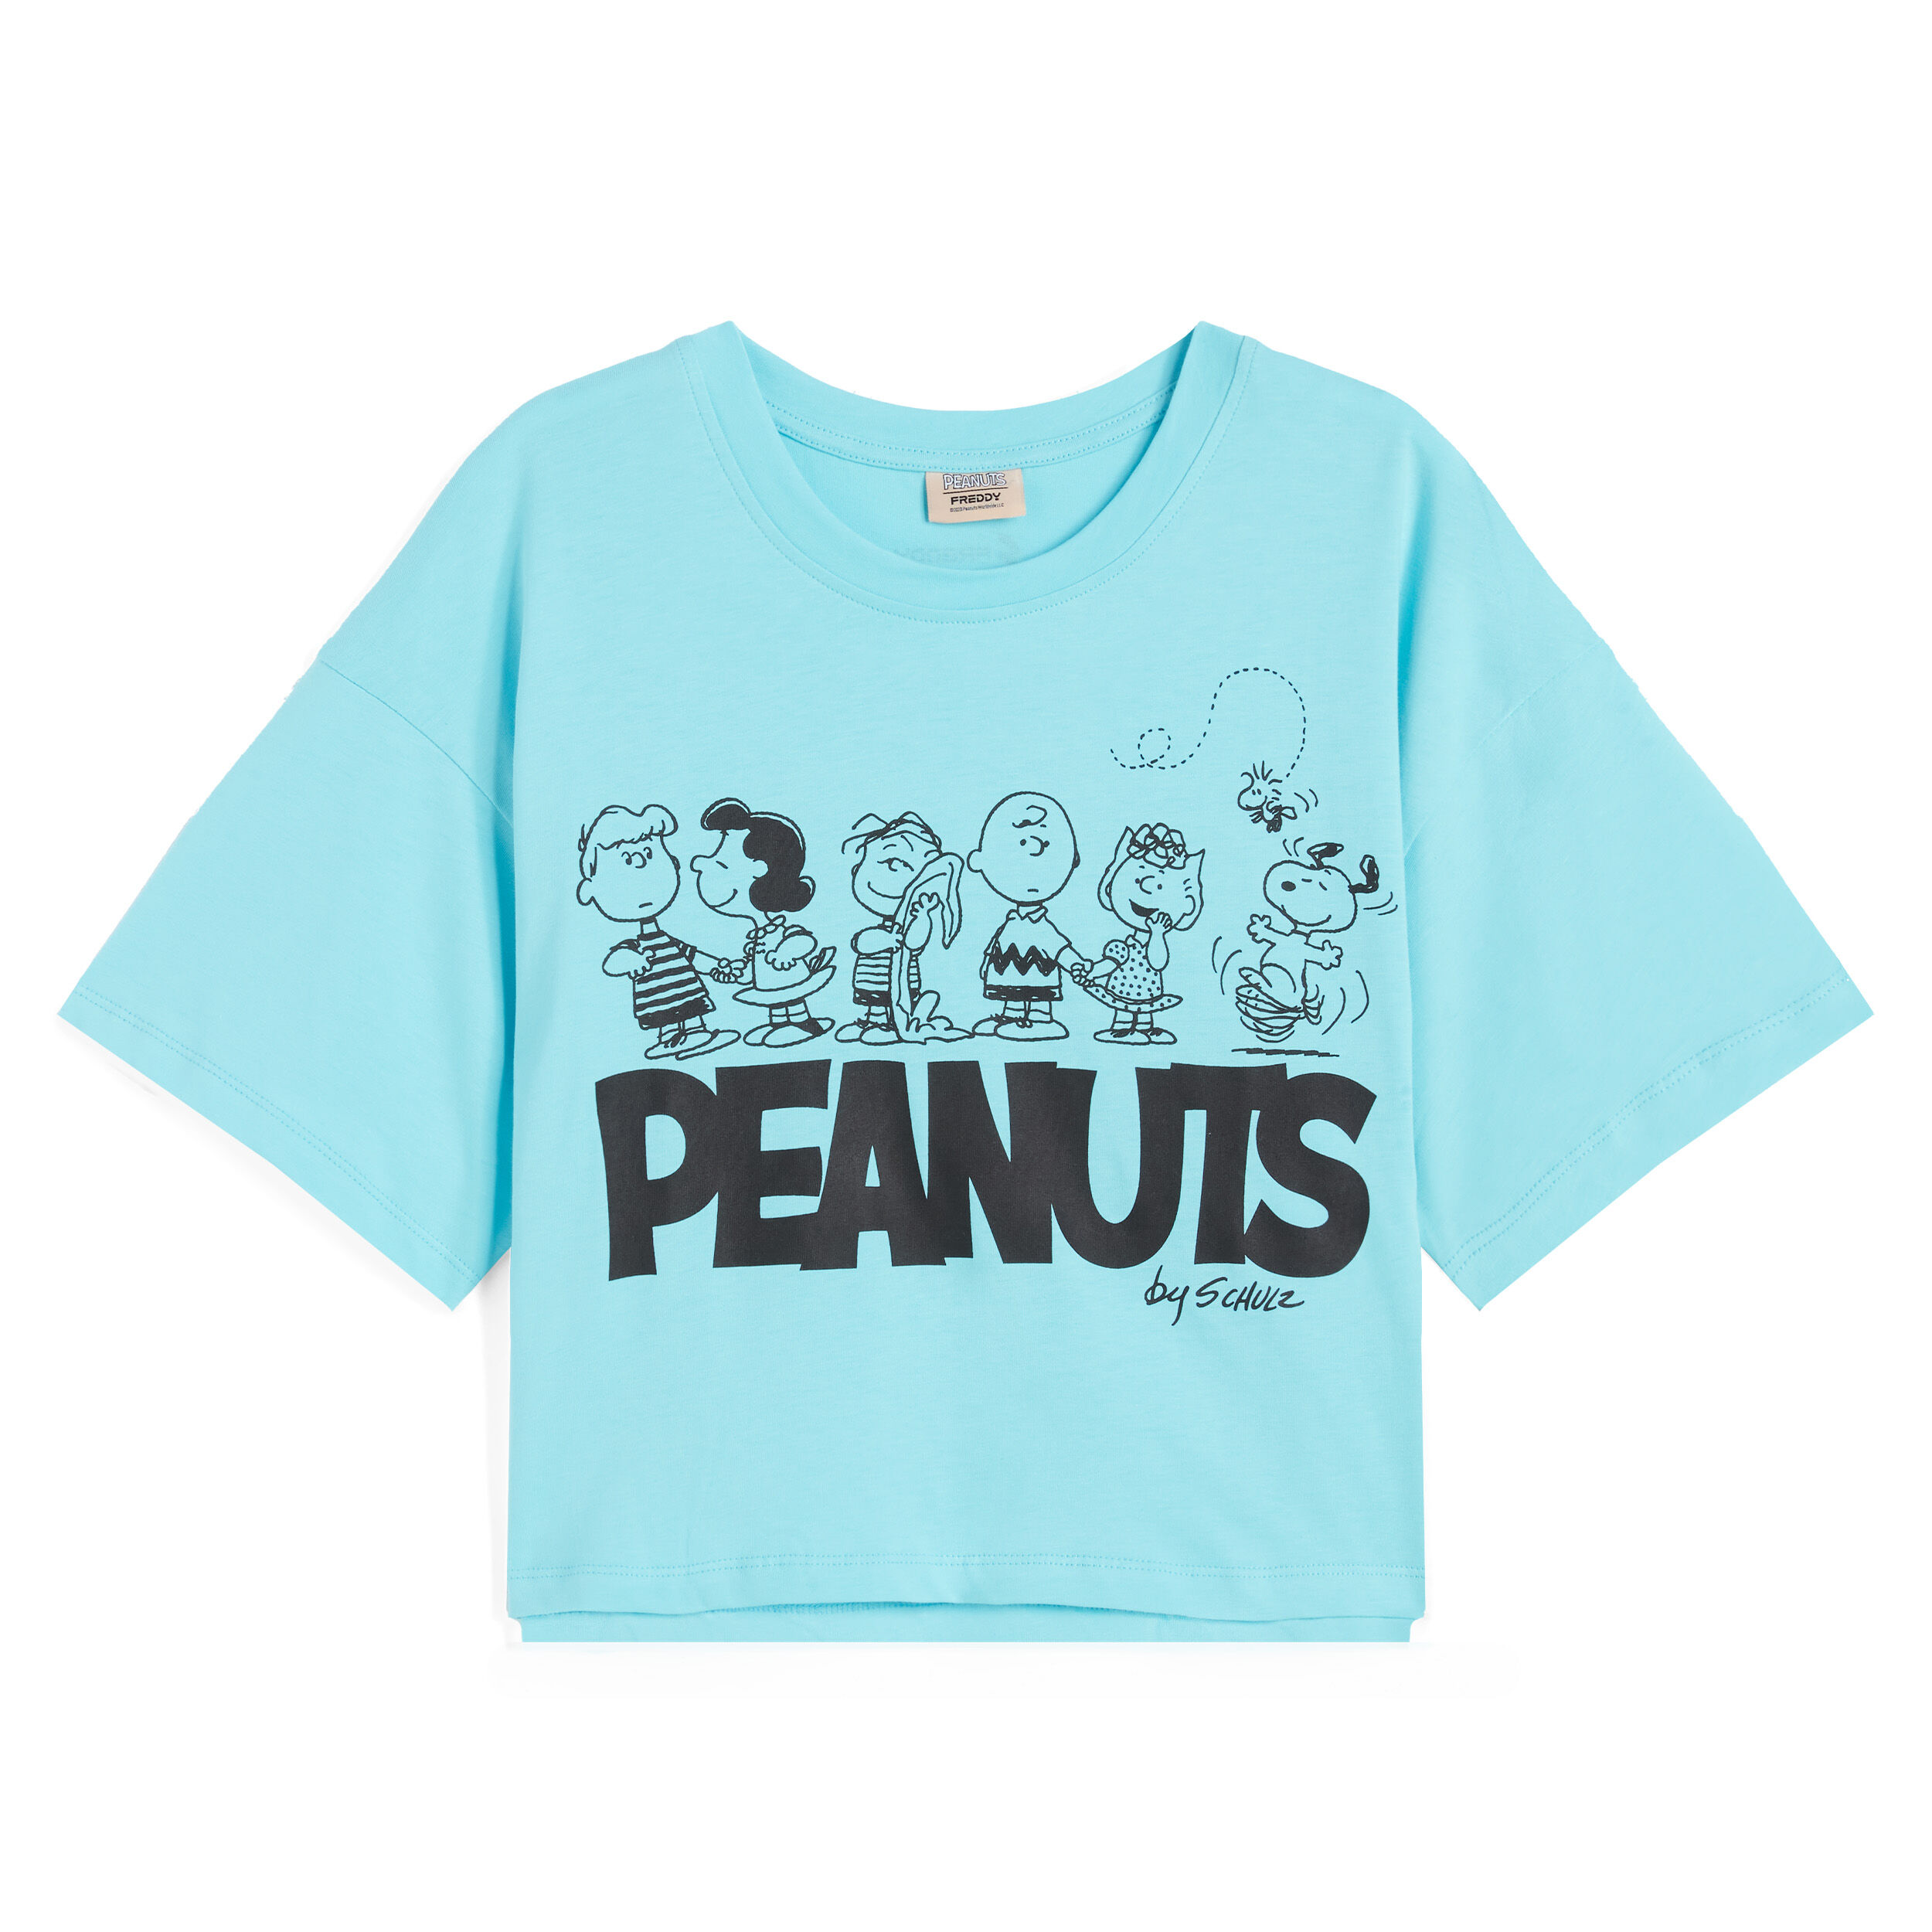 Freddy T-shirt donna corta in jersey con grafica Peanuts Blue Radiance Donna Extra Large